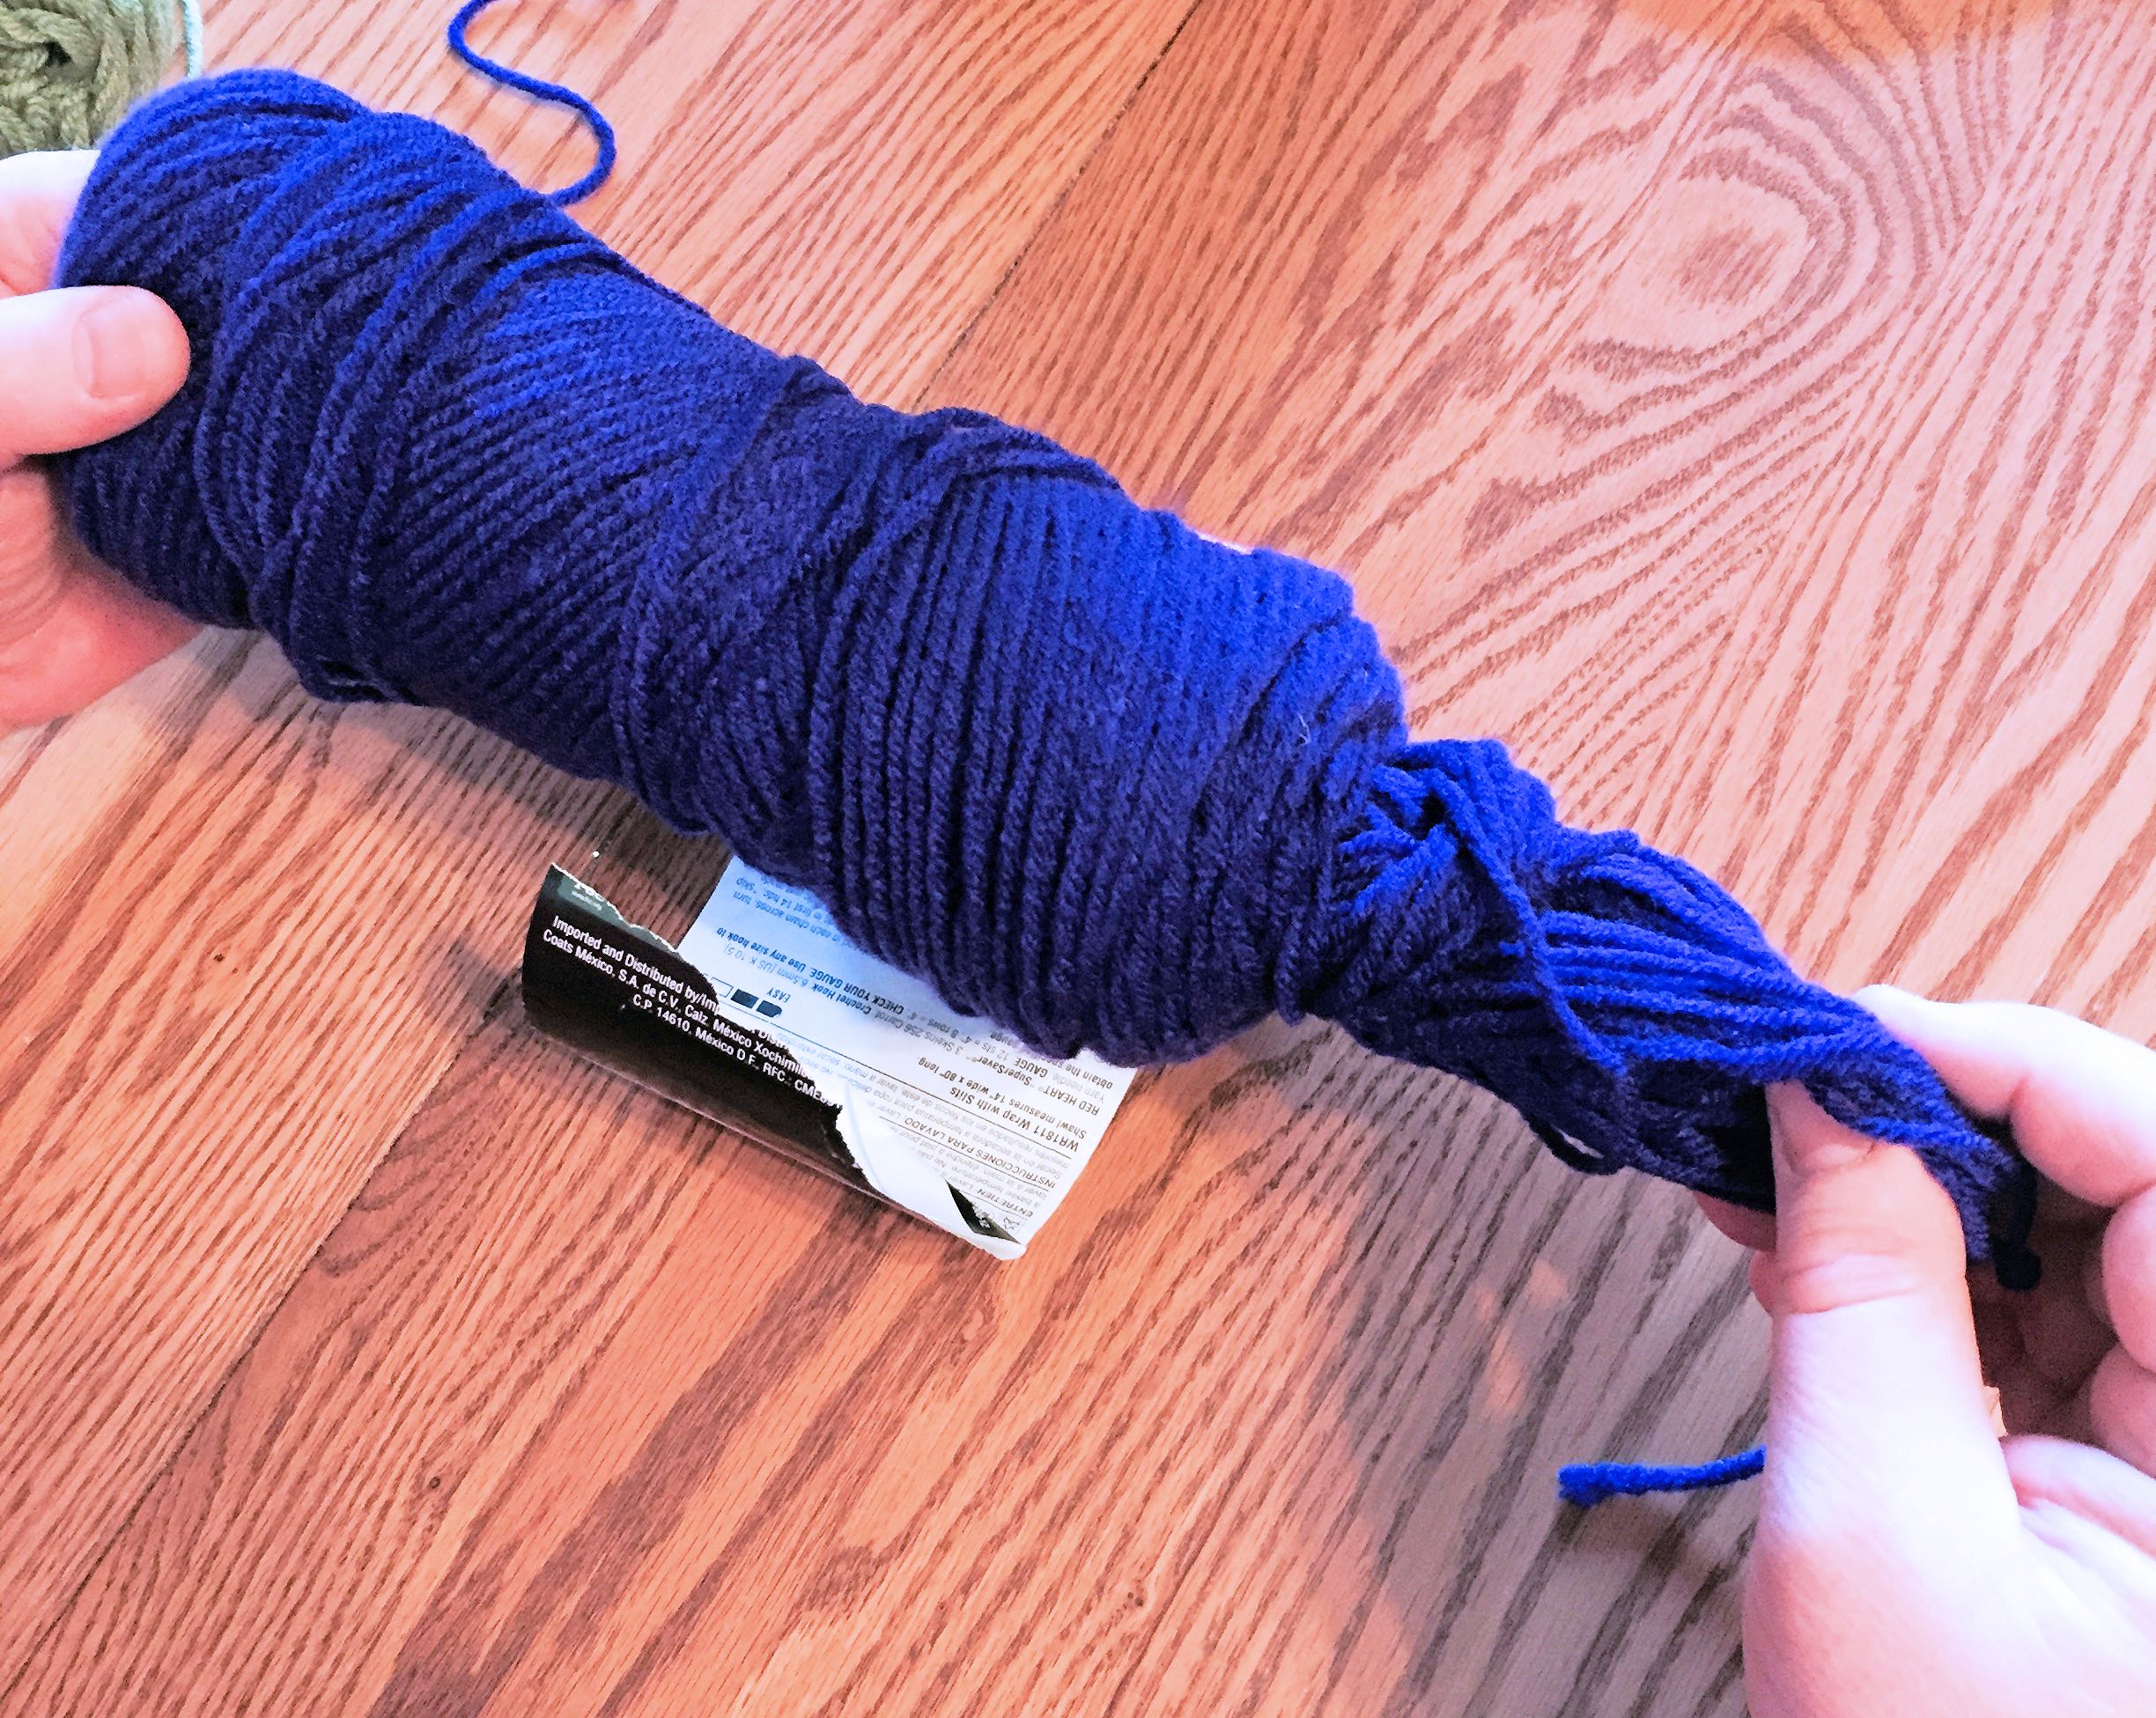 How do you keep your yarn from rolling away? : r/knitting